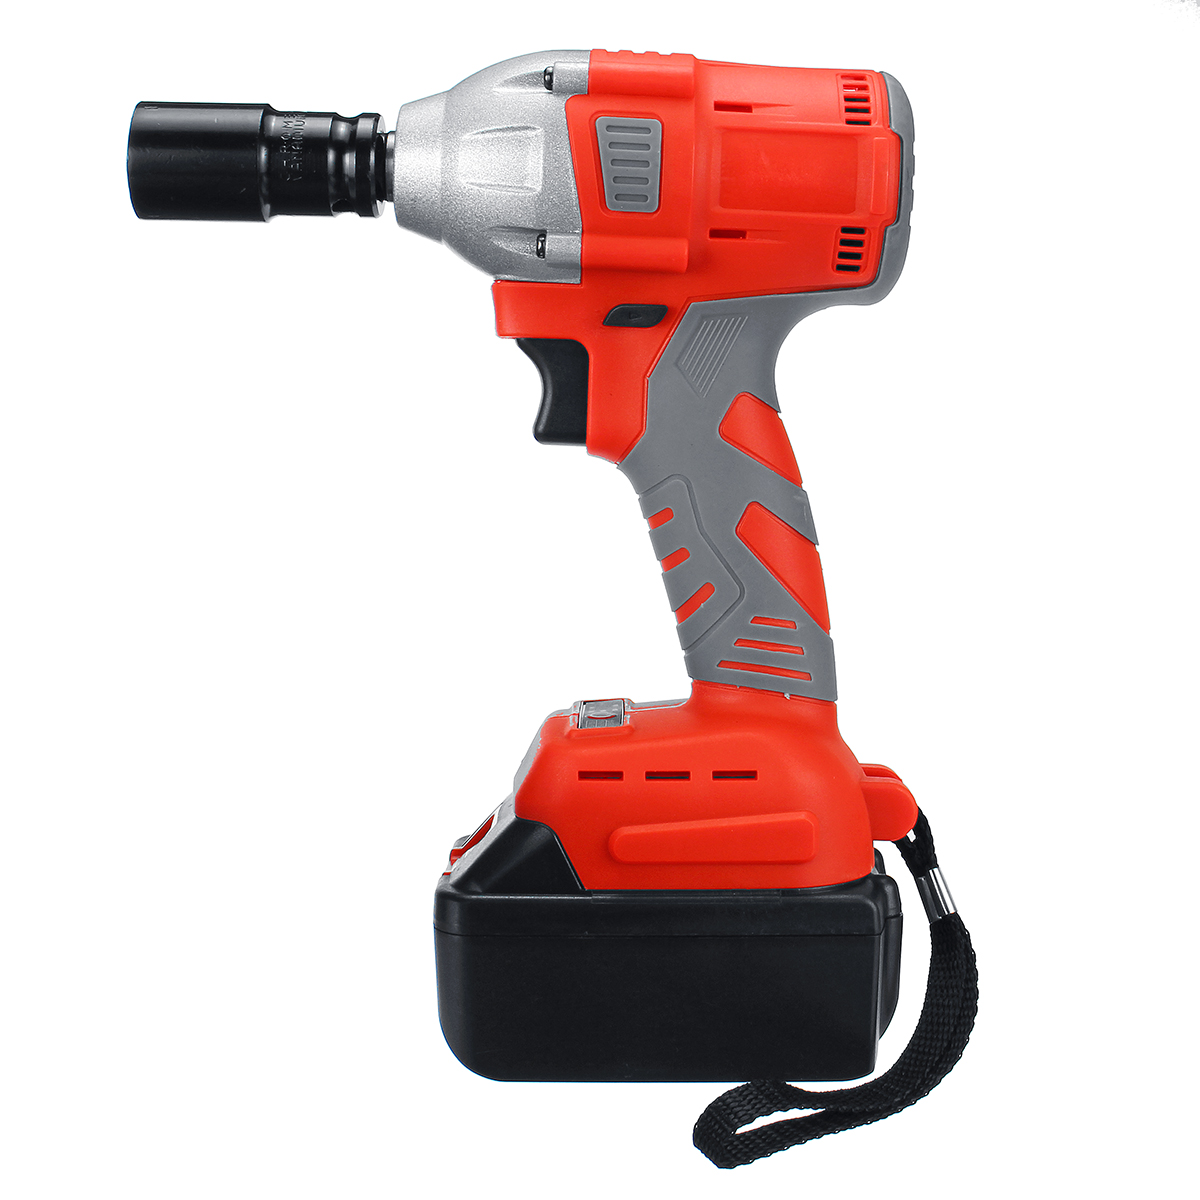 128VF188VF-Cordless-Rechargable-Brushless-Electric-Wrench-W-1or-2-Lithium-Battery-1431480-5